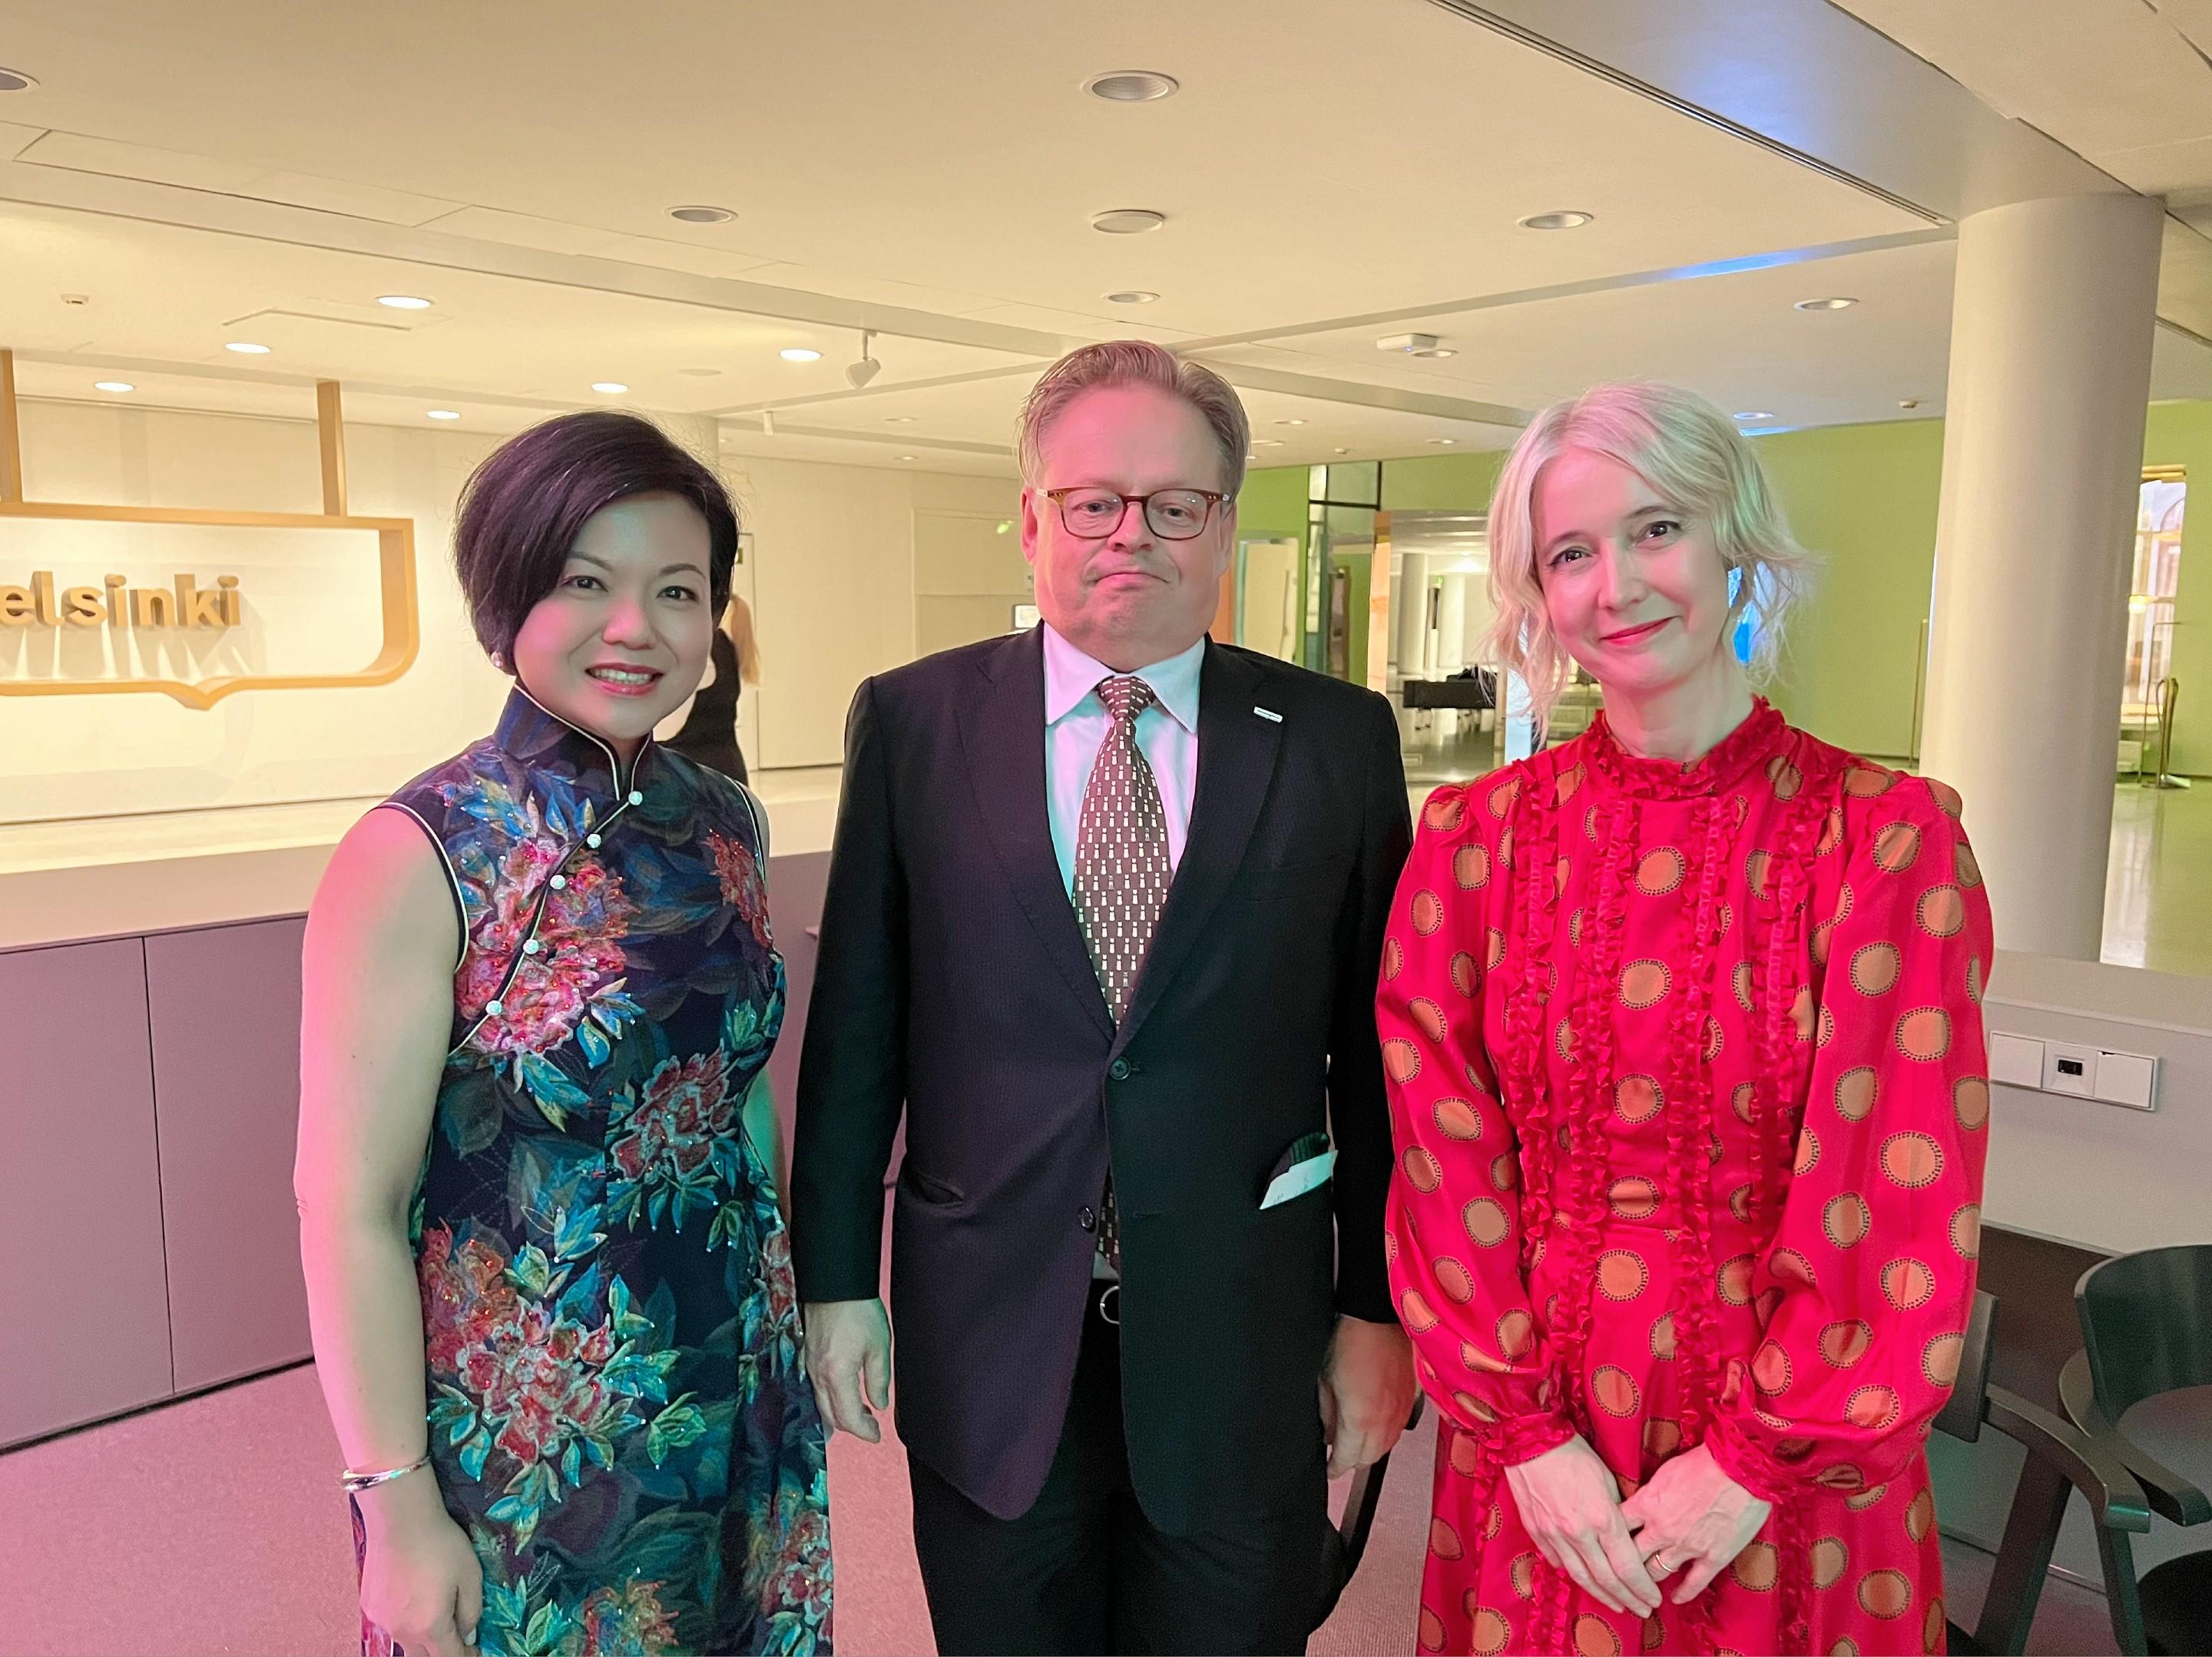 The Deputy Secretary for Culture, Sports and Tourism, Mrs Vicki Kwok, led the Hong Kong Special Administrative Region delegation to attend the World Cities Culture Forum Summit 2022 from October 5 to 7 (Helsinki time). Photo shows Mrs Kwok (left) with the Mayor of Helsinki, Mr Juhana Vartiainen (centre), and the Founder and Chair of the World Cities Culture Forum, Ms Justine Simons (right).